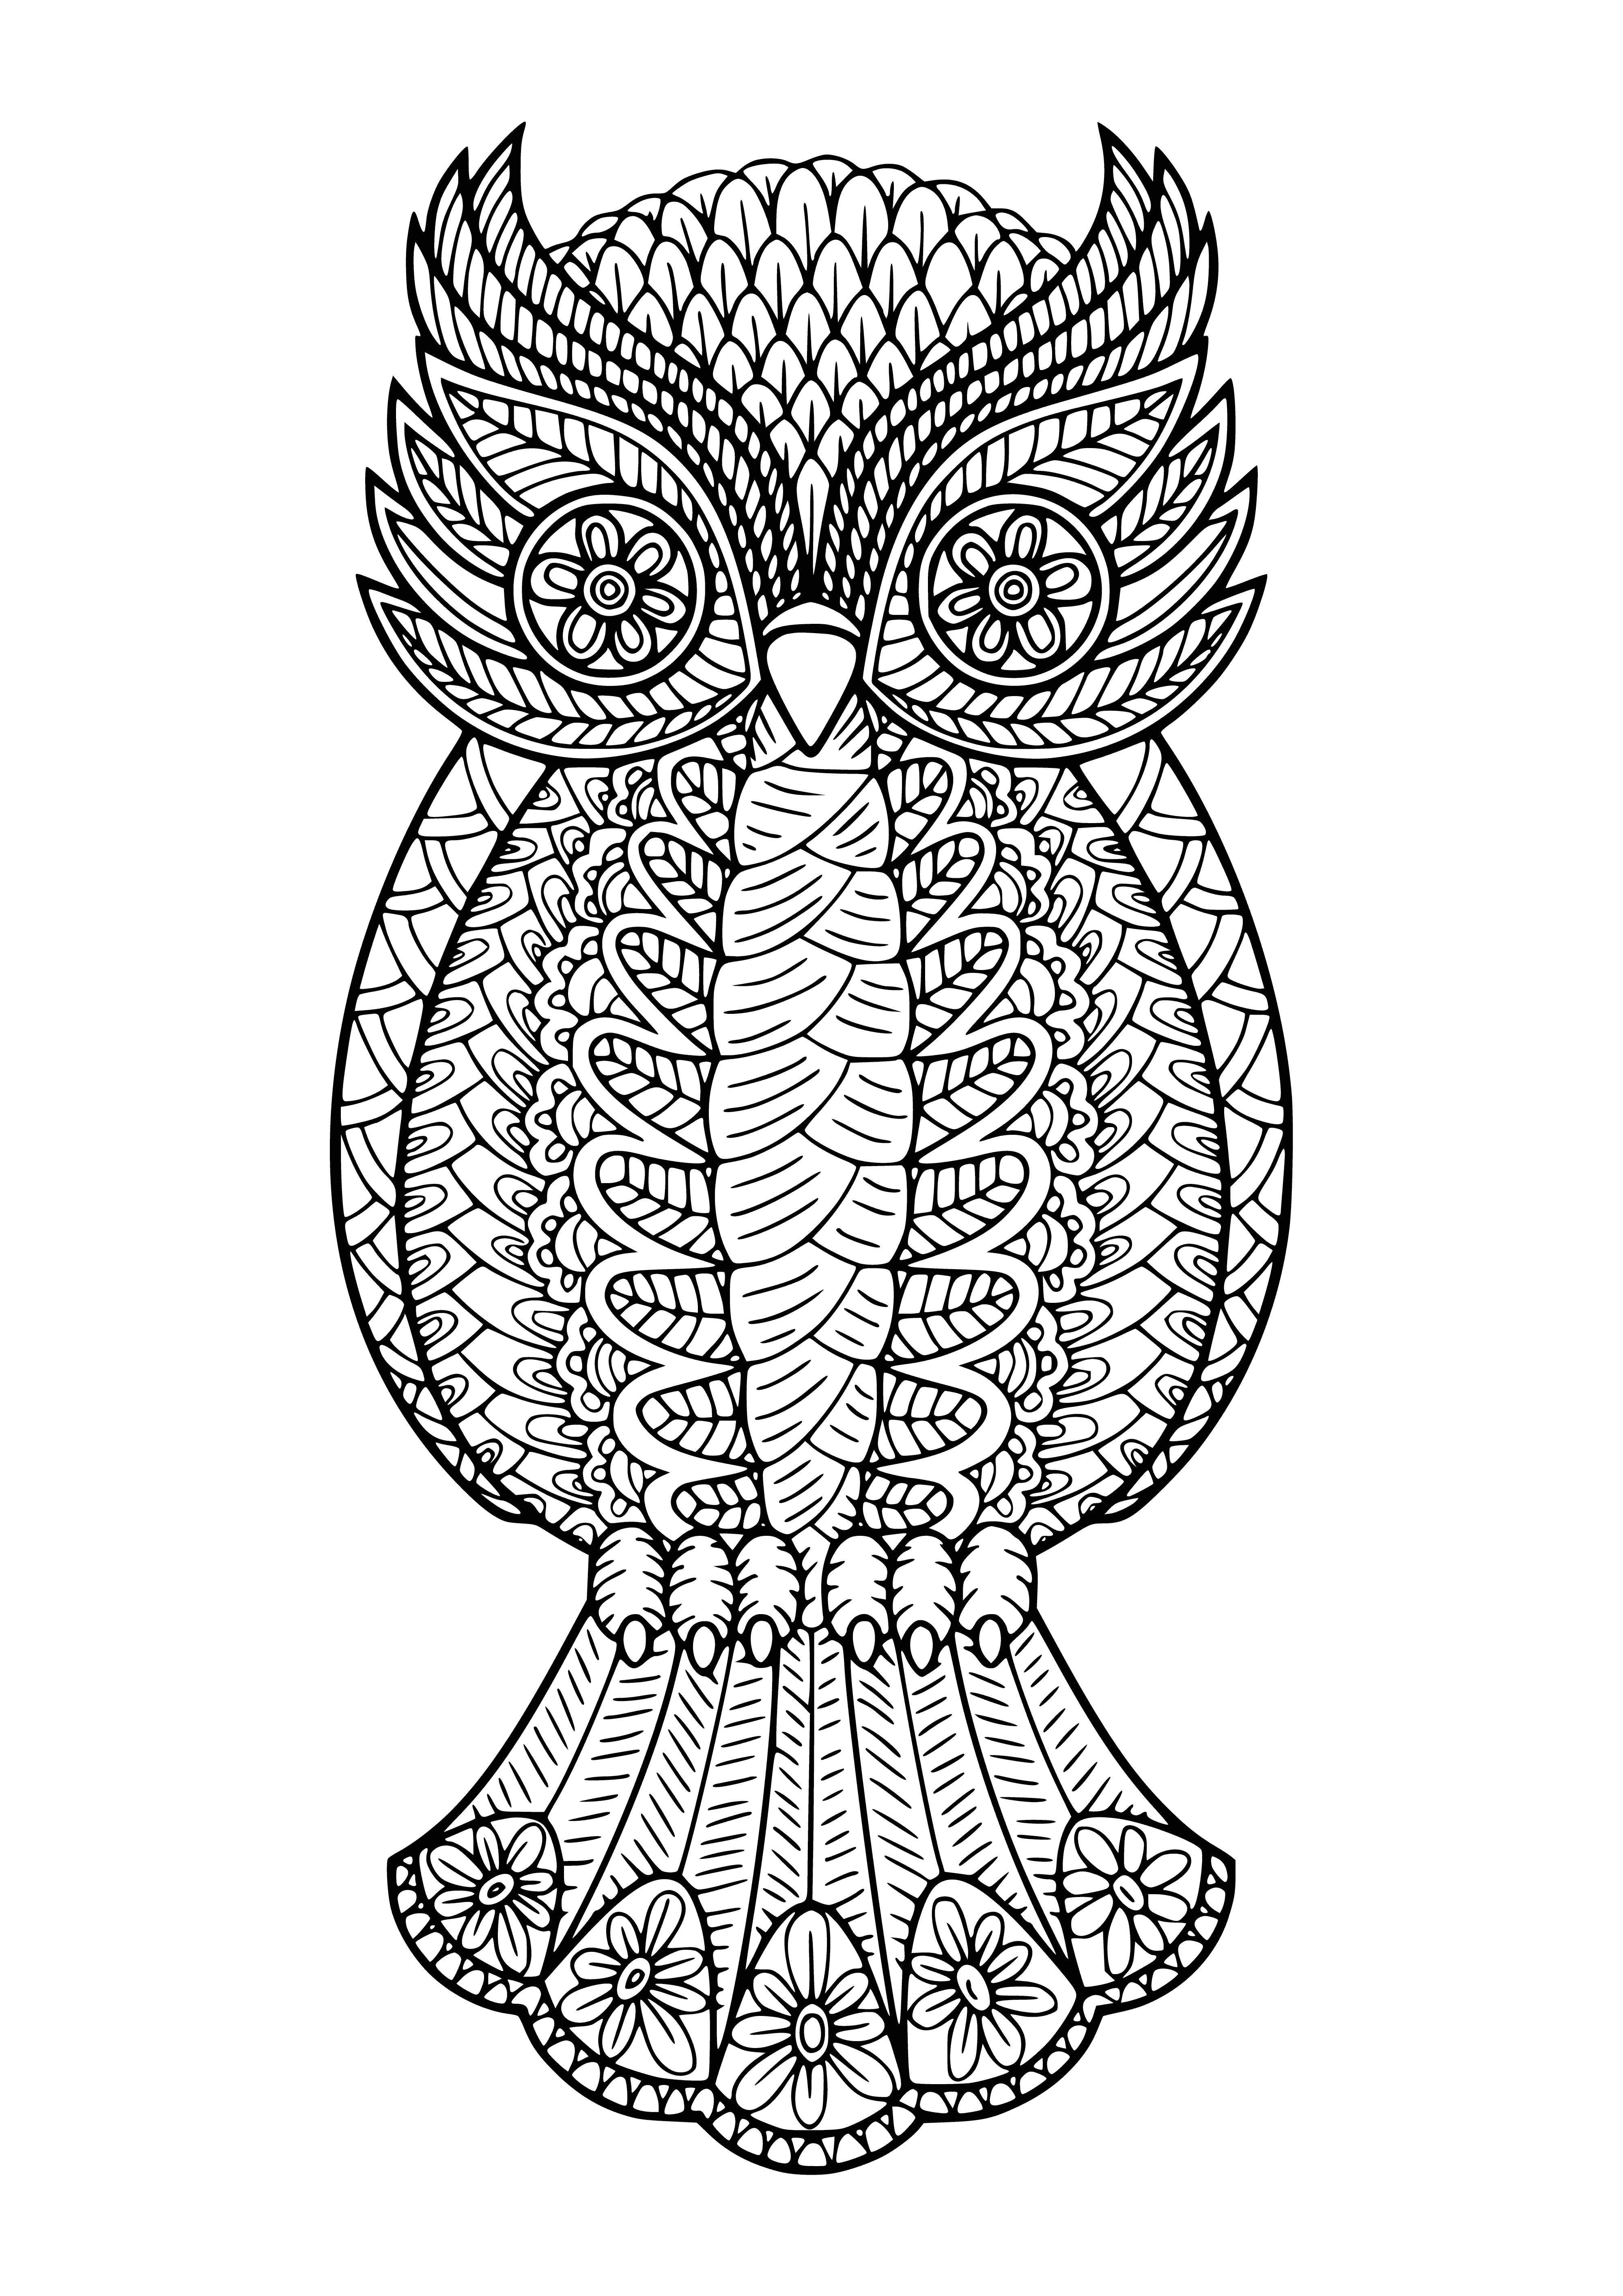 coloring page: Two brown owls with yellow eyes sit on a tree branch. One has wings spread and the other looks to the side.